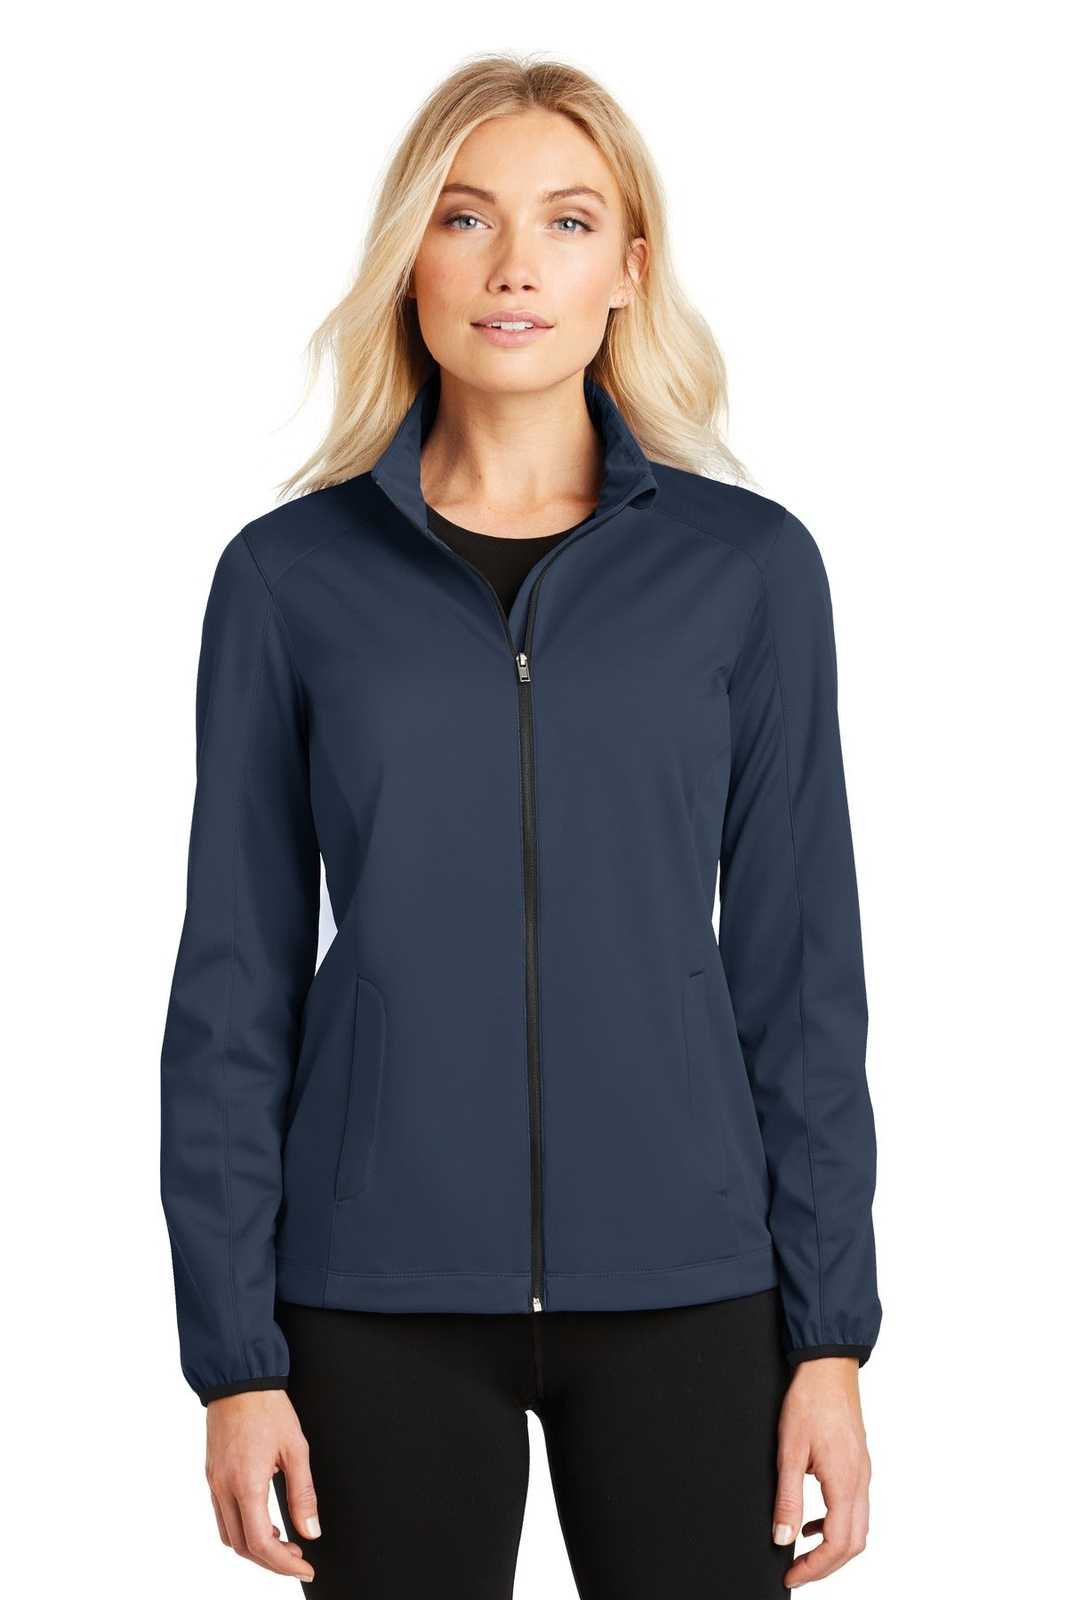 Port Authority L717 Ladies Active Soft Shell Jacket - Dress Blue Navy - HIT a Double - 1